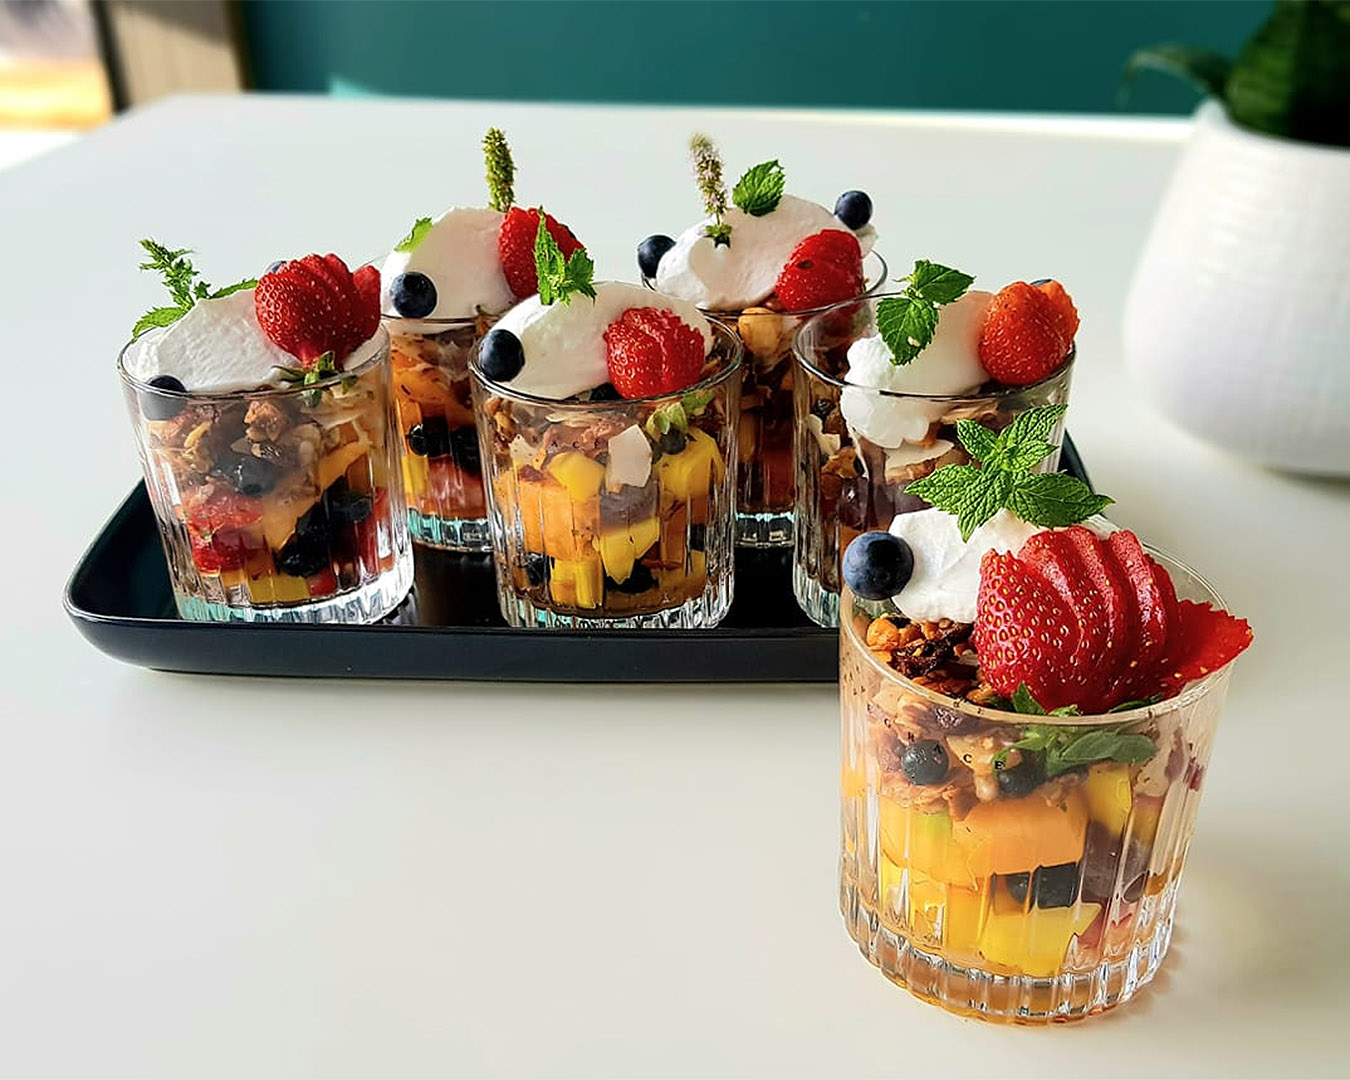 Fruit salad and granola cups at Pearl Kitchen, one of the best cafes in Tauranga and Mount Maunganui.